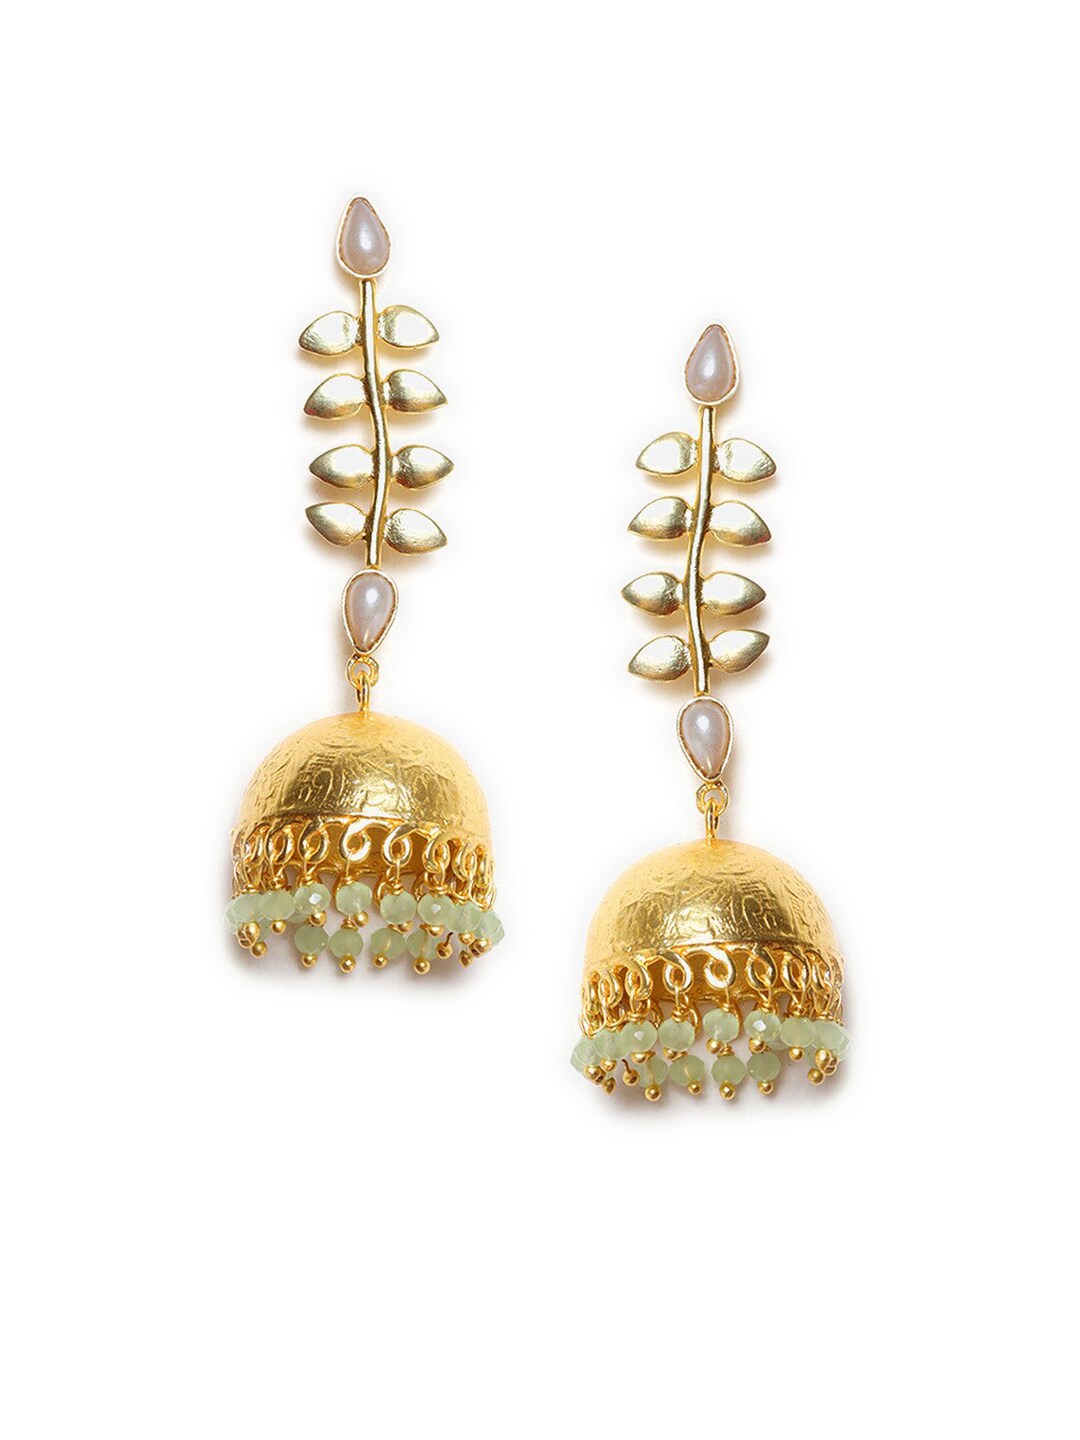 W Green Dome Shaped Jhumkas Earrings Price in India